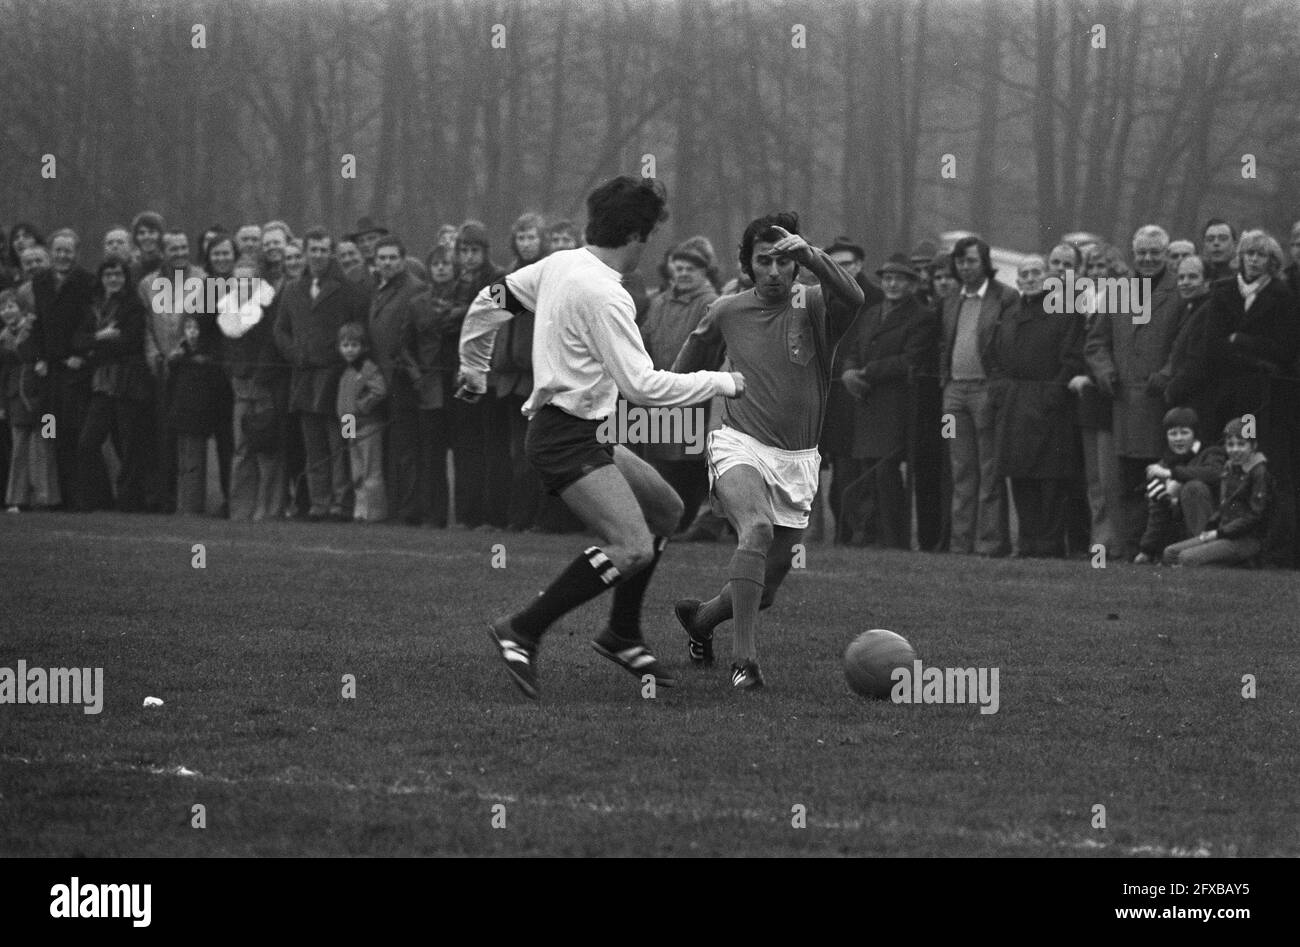 KHFC against Old Internationals, Coen Moulijn in action, January 1, 1973, sports, soccer, The Netherlands, 20th century press agency photo, news to remember, documentary, historic photography 1945-1990, visual stories, human history of the Twentieth Century, capturing moments in time Stock Photo